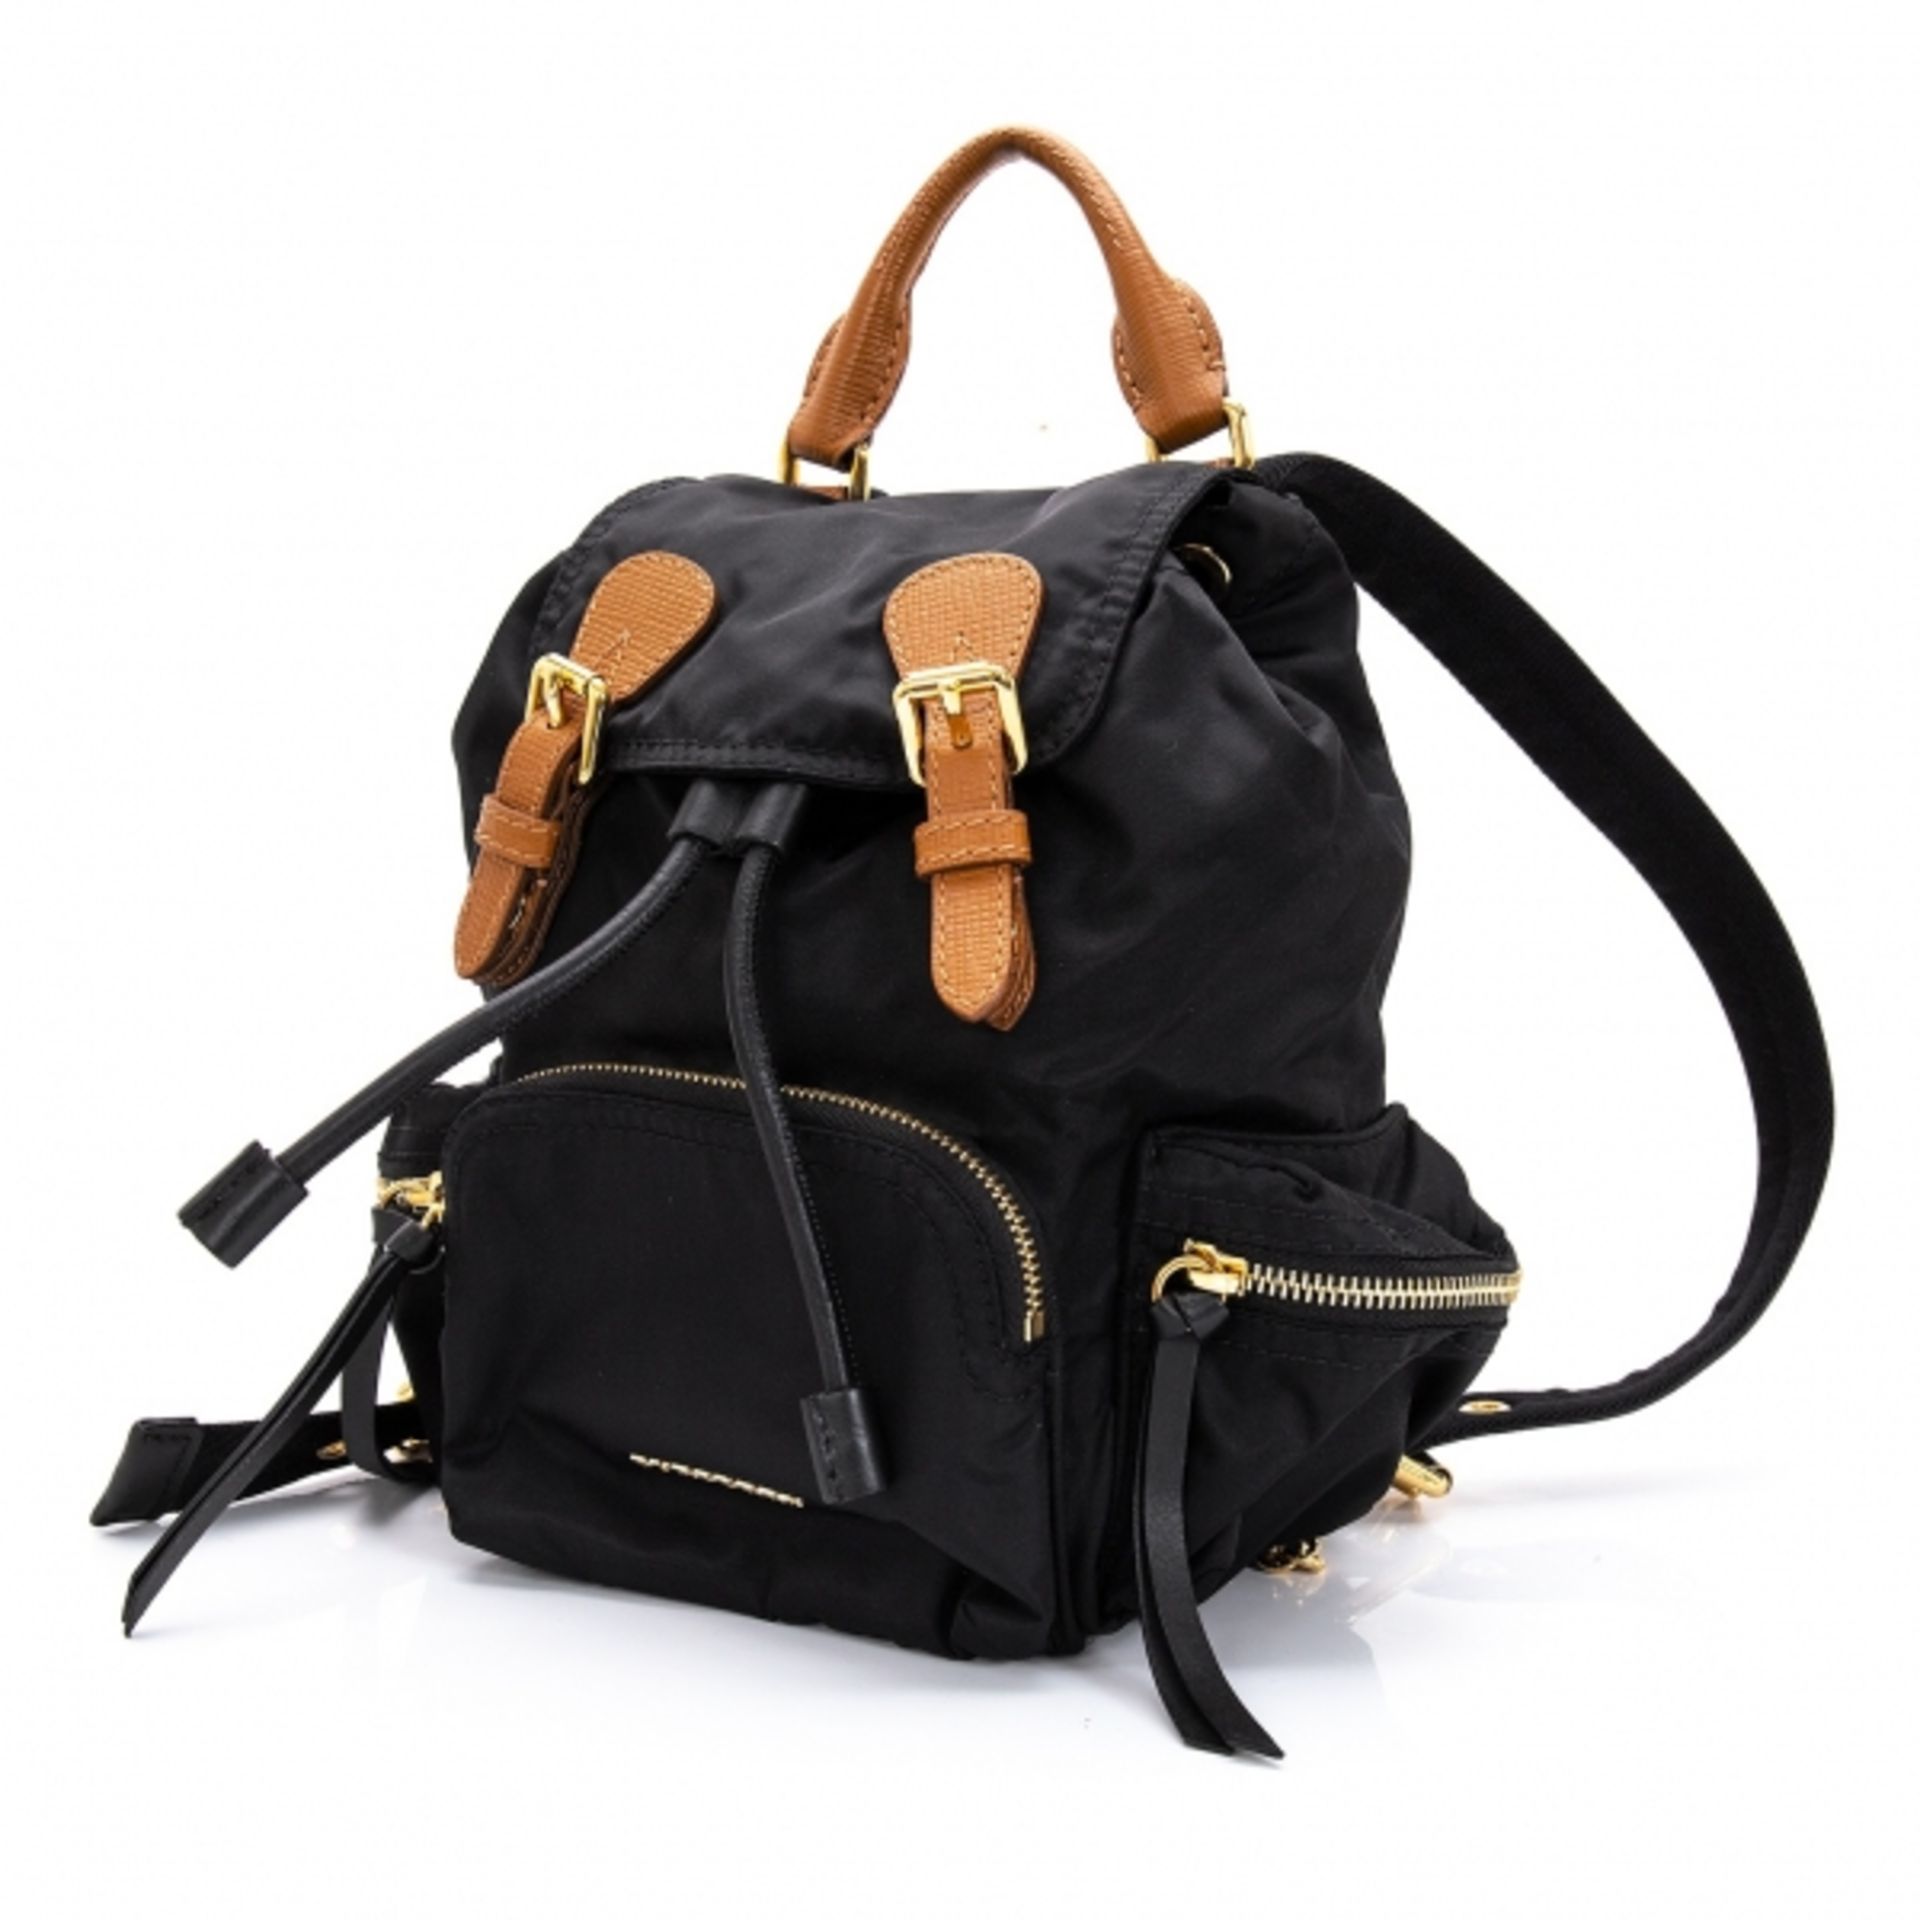 BURBERRY black nylon backpack. Personalised ZYL. 35x35cm - Image 3 of 11